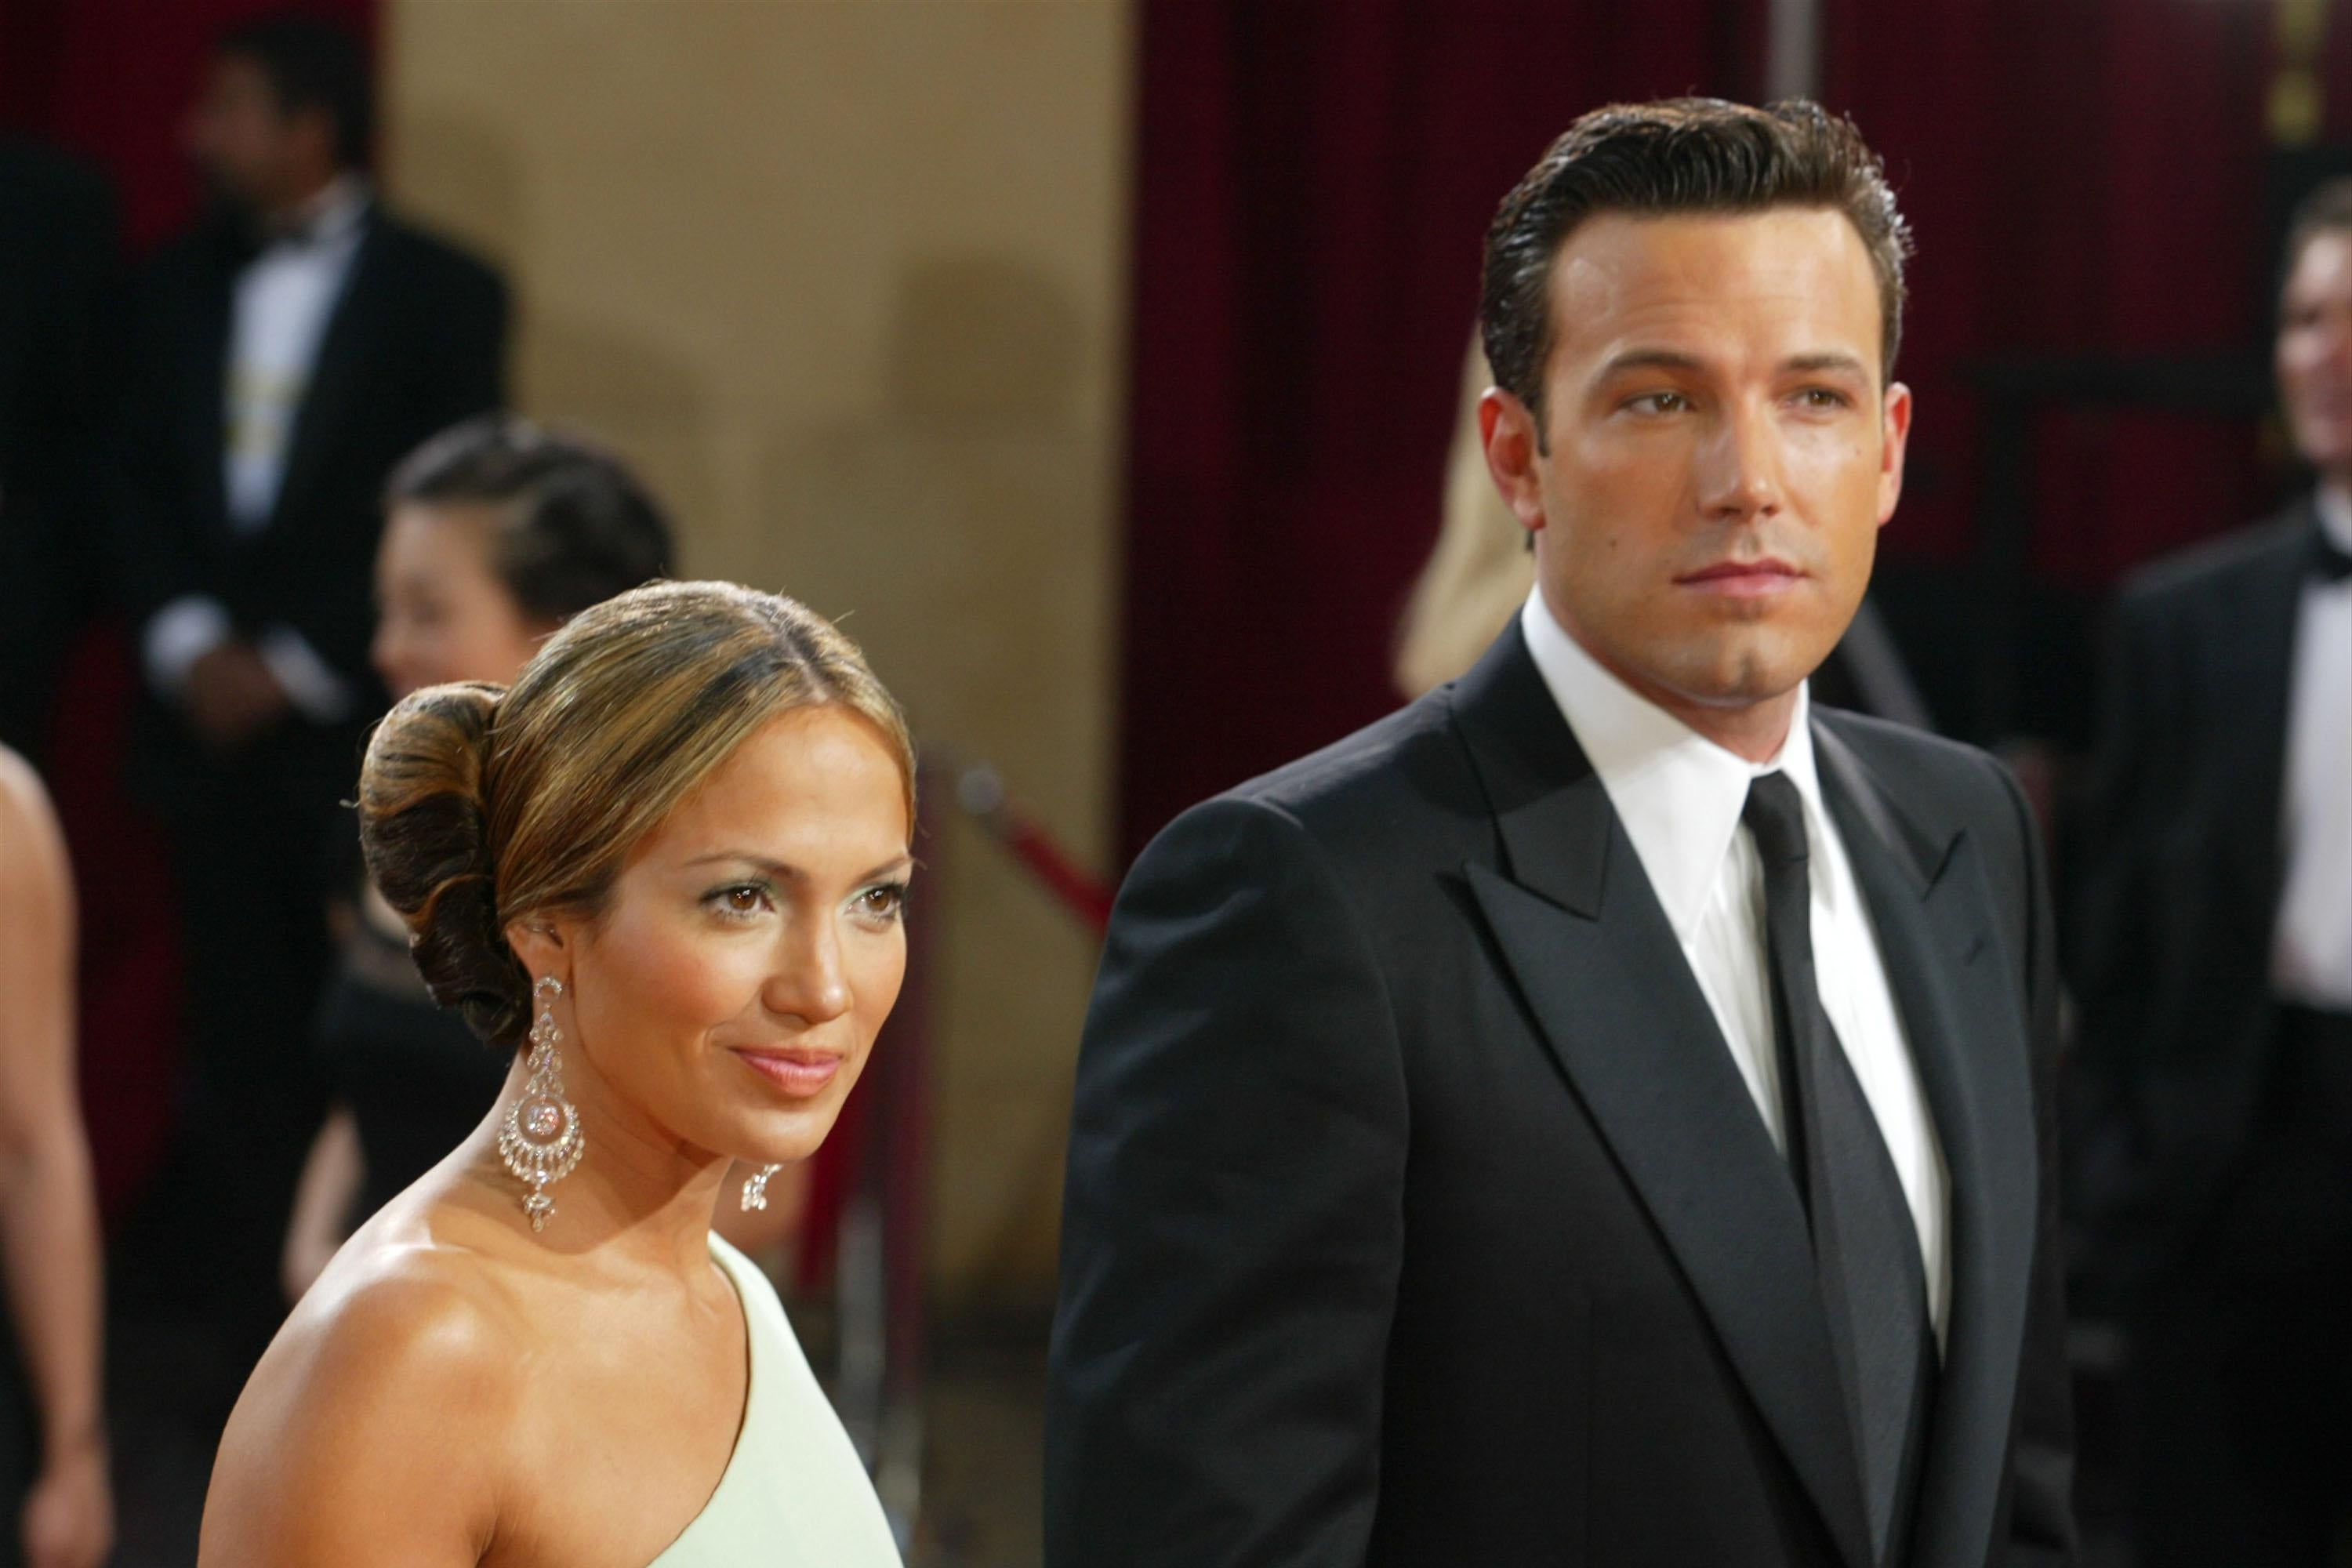 Jennifer Lopez in a one-shoulder white dress and Ben Affleck in a suit on the red carpet